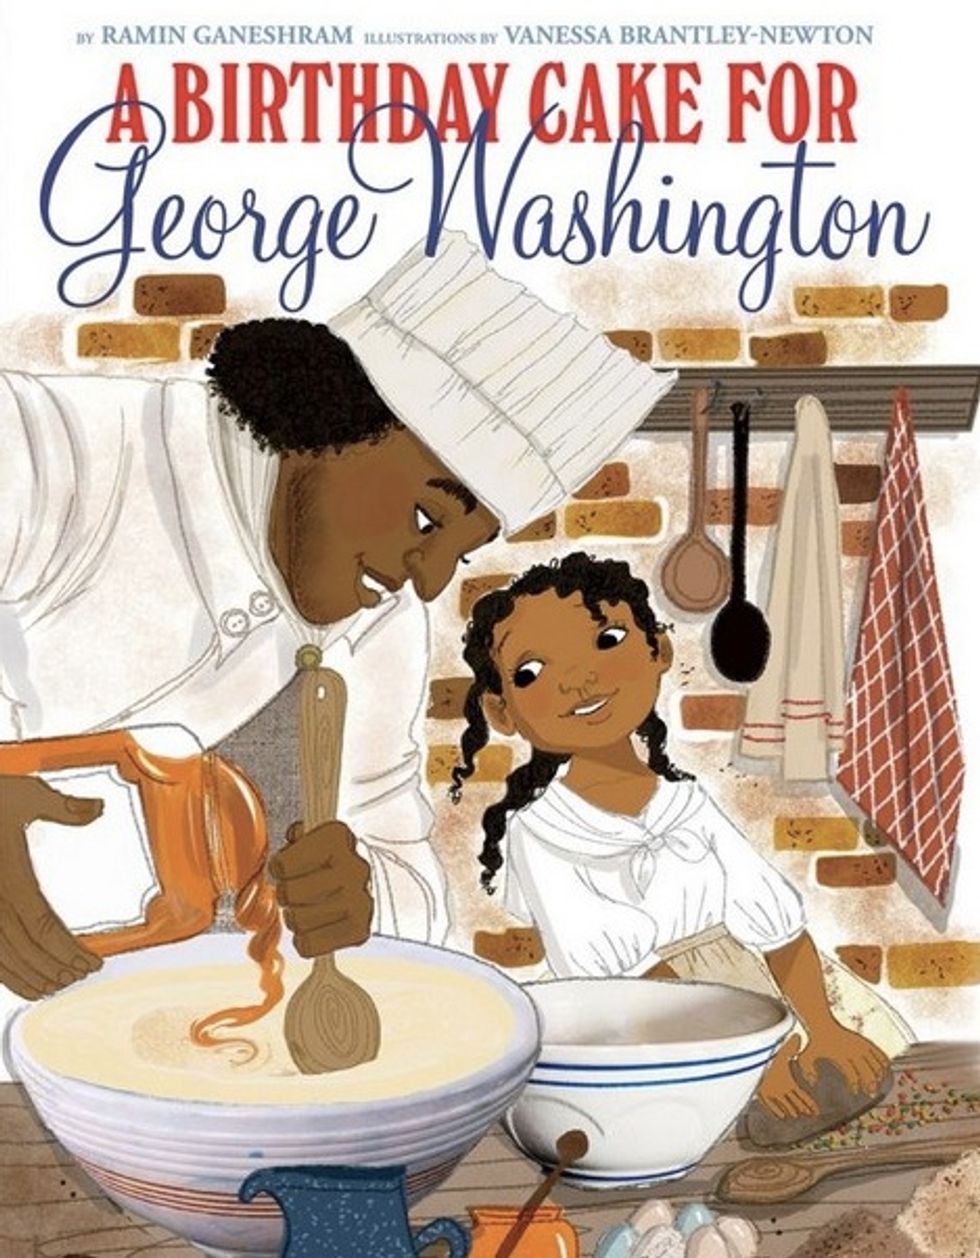 Children's Picture Book About George Washington Slaves Pulled From Shelves by Scholastic. Here's Why.